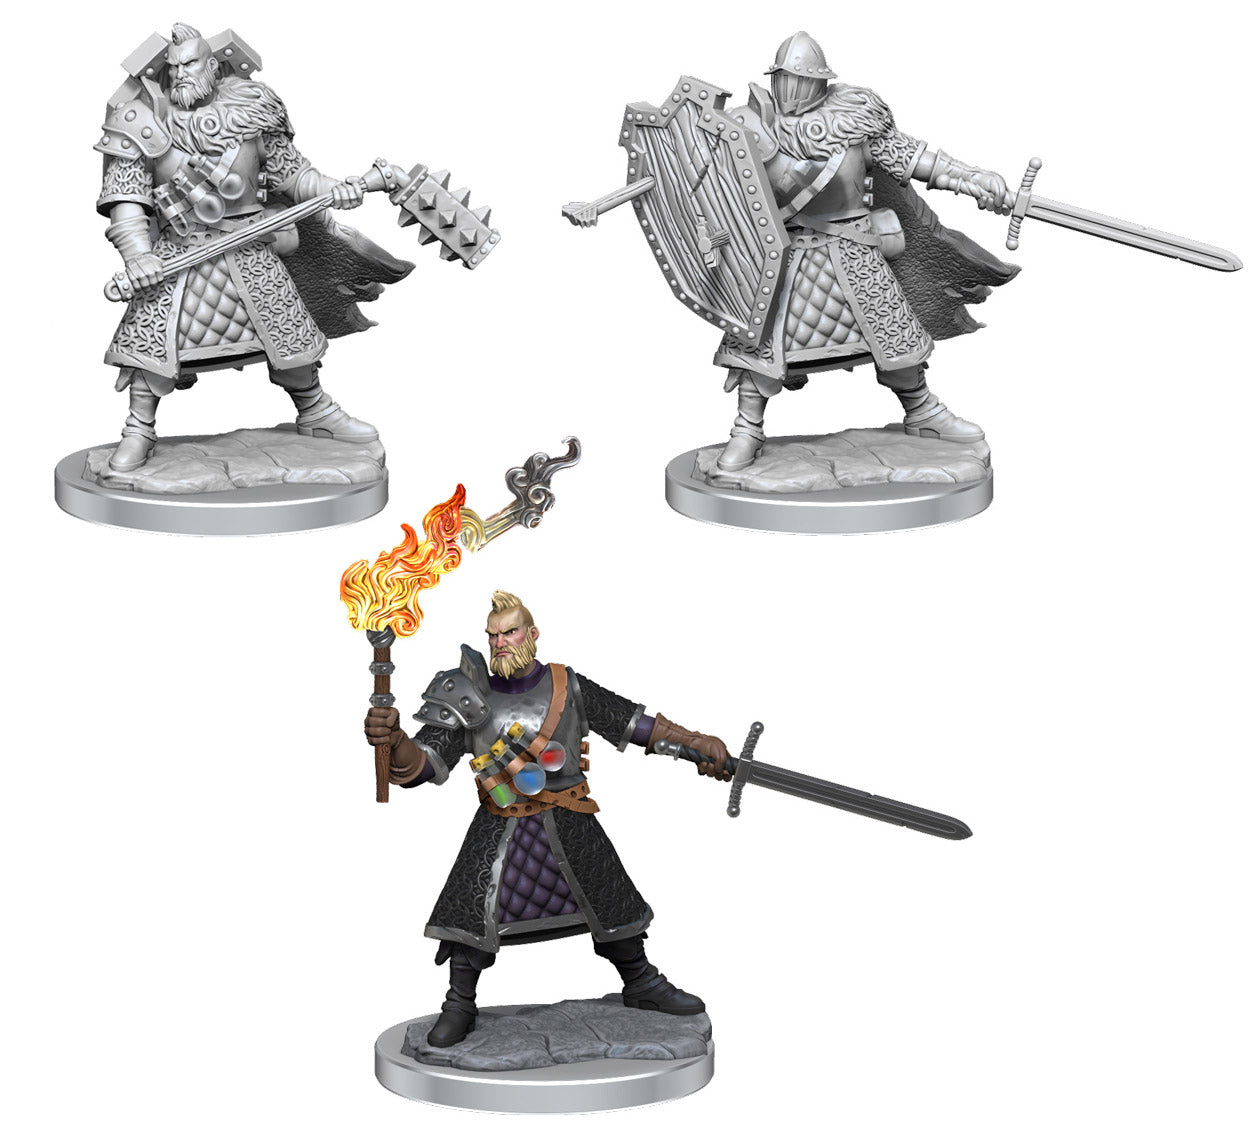 D&D Frameworks: Human Fighter Male - Unpainted and Unassembled – WizKids